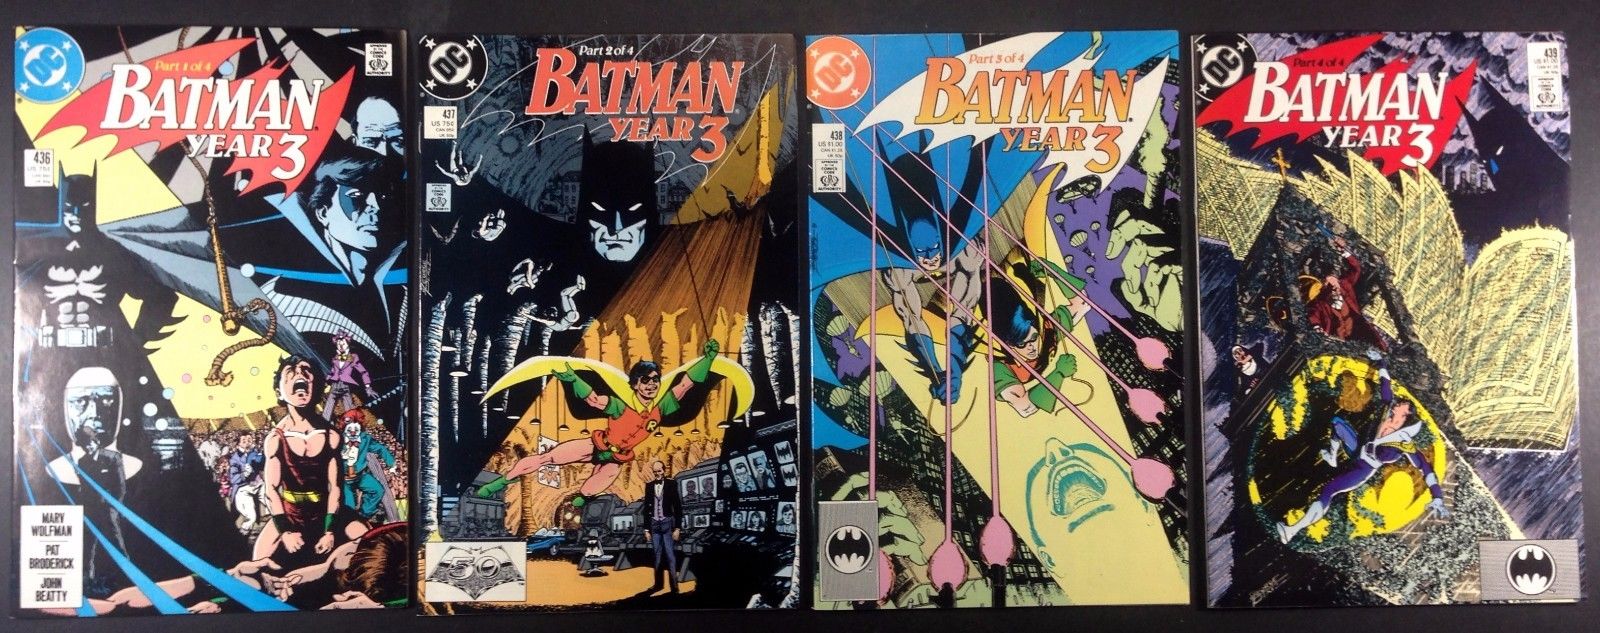 Batman (1940) # 436 437 438 439 complete Year 3 set by Wolfman with Perez  covers